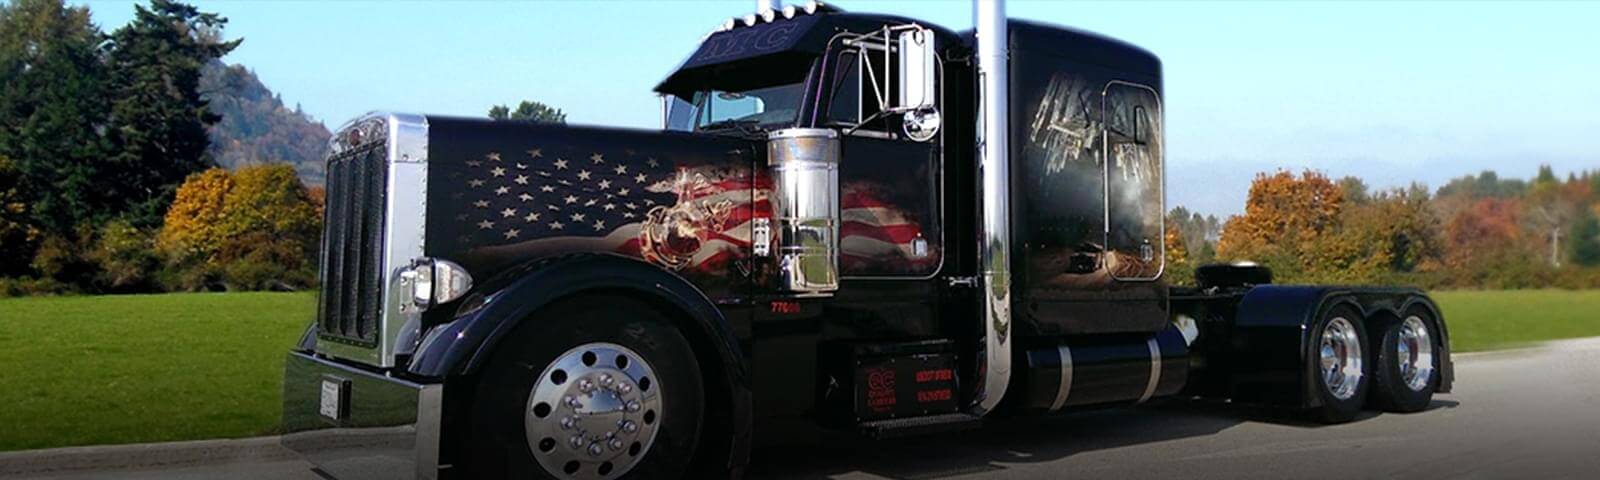 Truck with american flag on the side